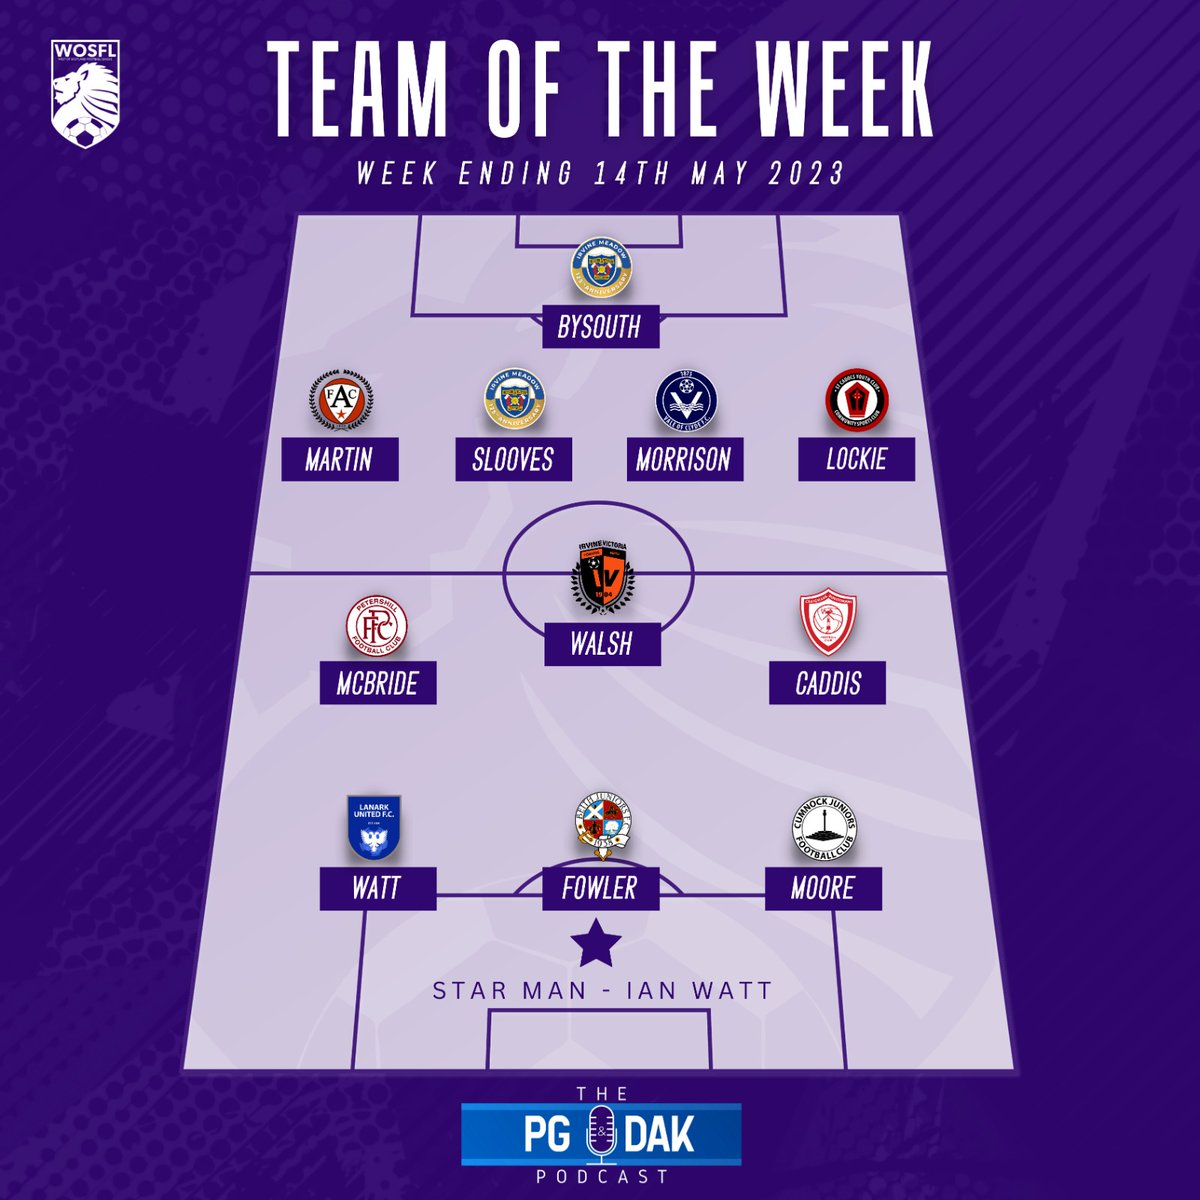 ⚽️🎙TEAM OF THE WEEK🎙⚽️

Congratulations to all the players who have made this week's @OfficialWoSFL Team of the Week!

A special mention to STAR MAN Ian Watt of @LanarkFc